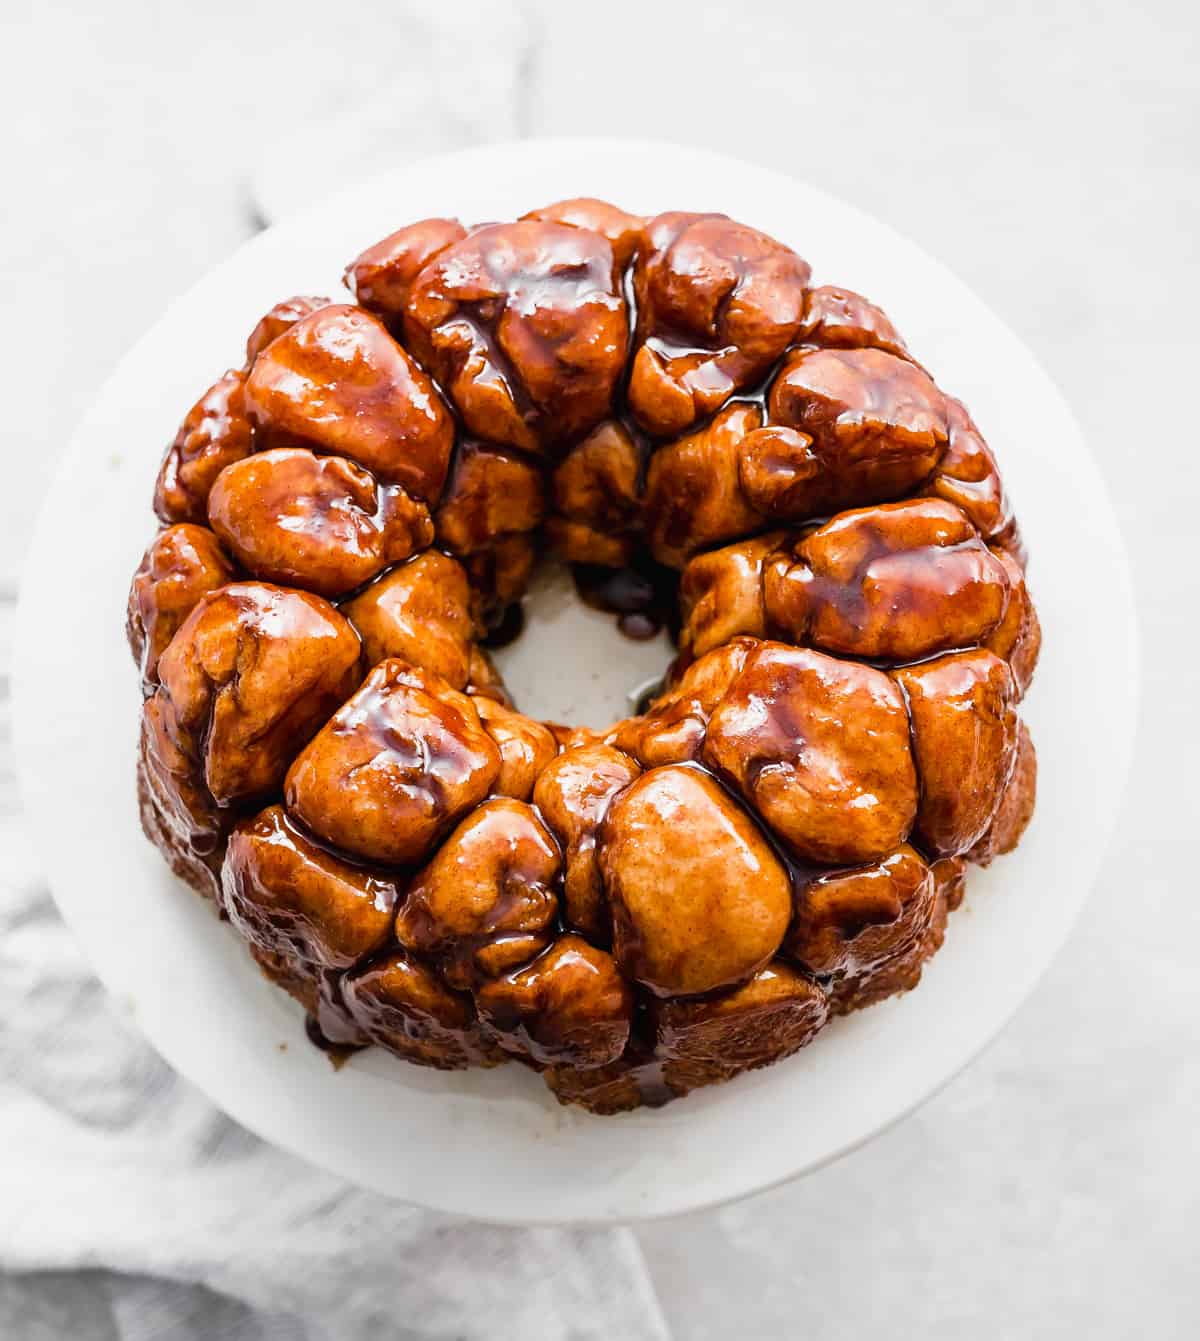 A golden brown baked Monkey Bread recipe made in a bundt pan turned out on a white plate.